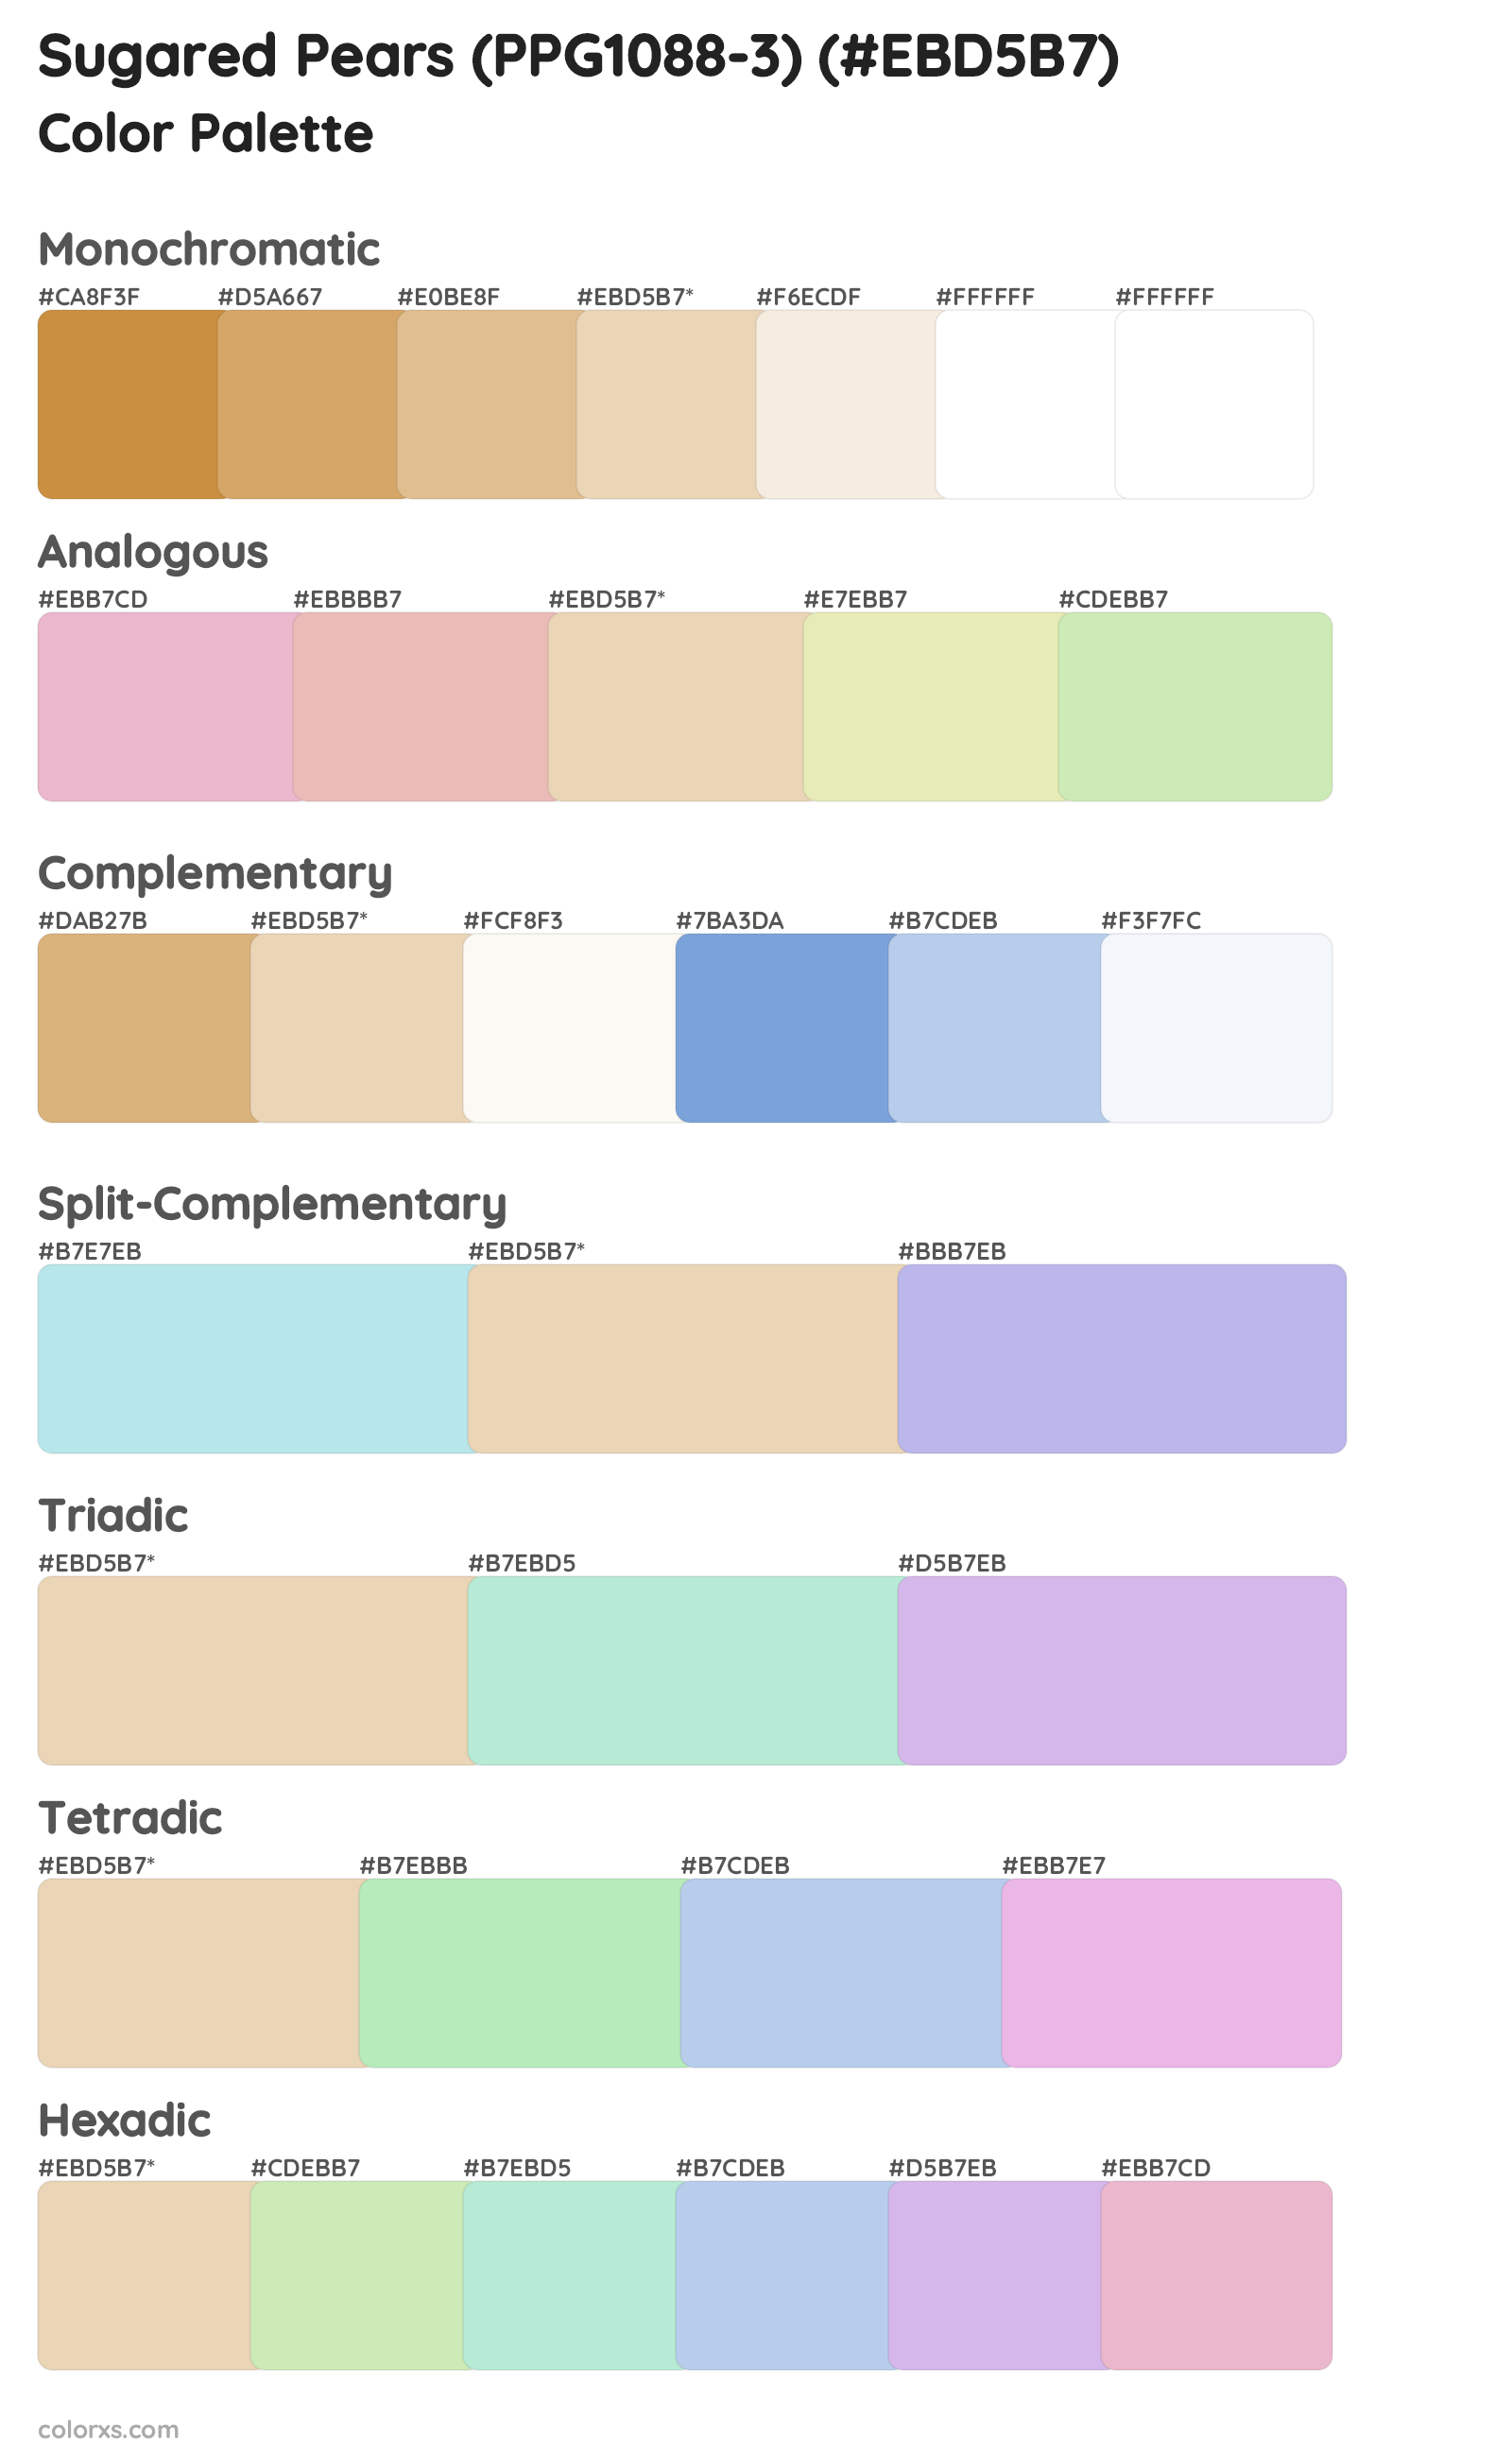 Sugared Pears (PPG1088-3) Color Scheme Palettes